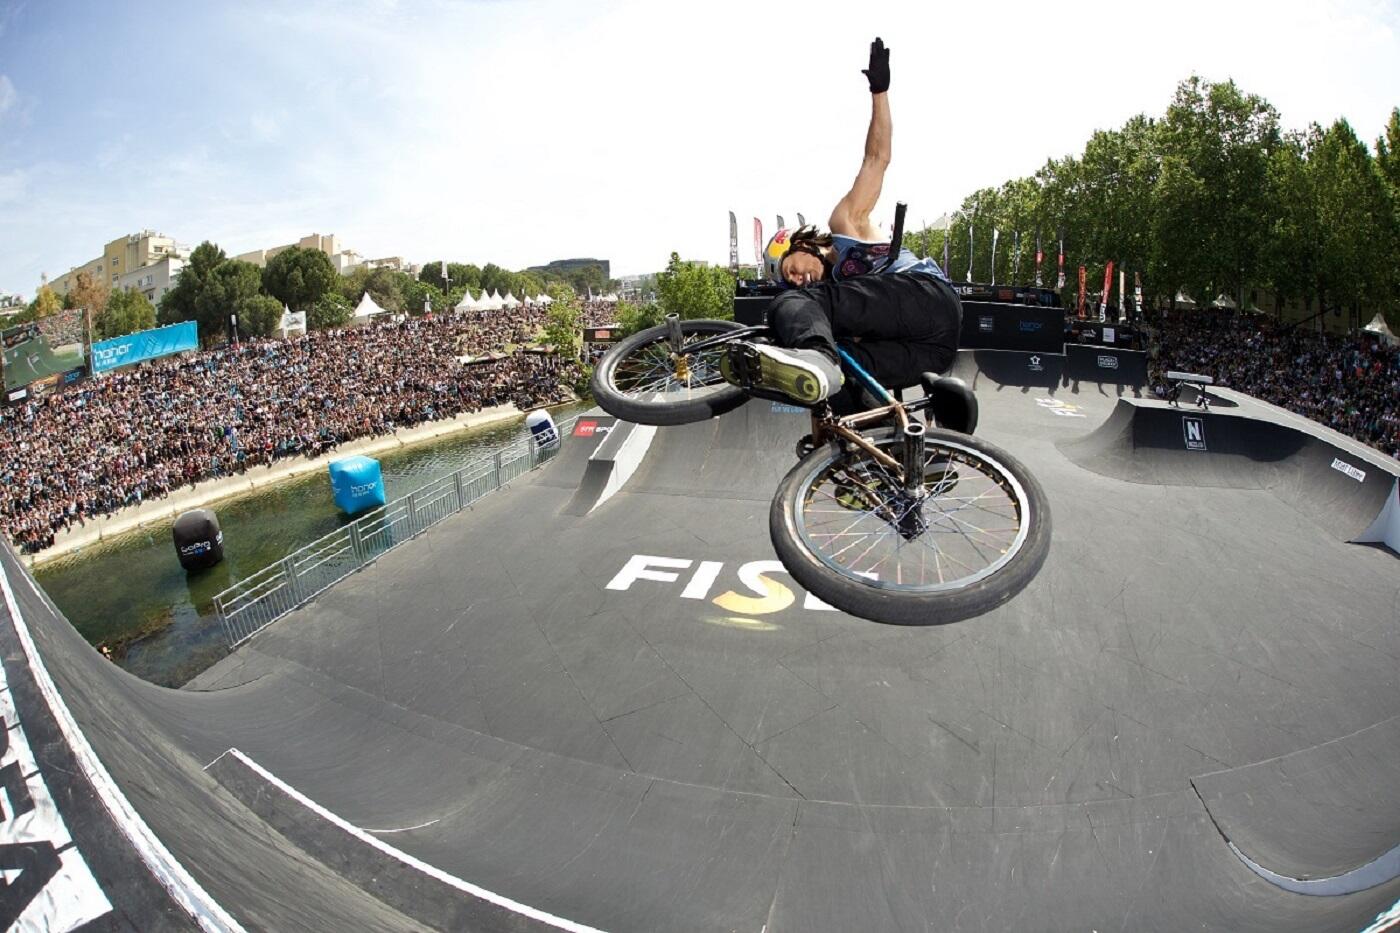 Athlete performing an aerial BMX trick at FISE Montpellier, a must-see event for extreme sports enthusiasts, close to Appart'City.